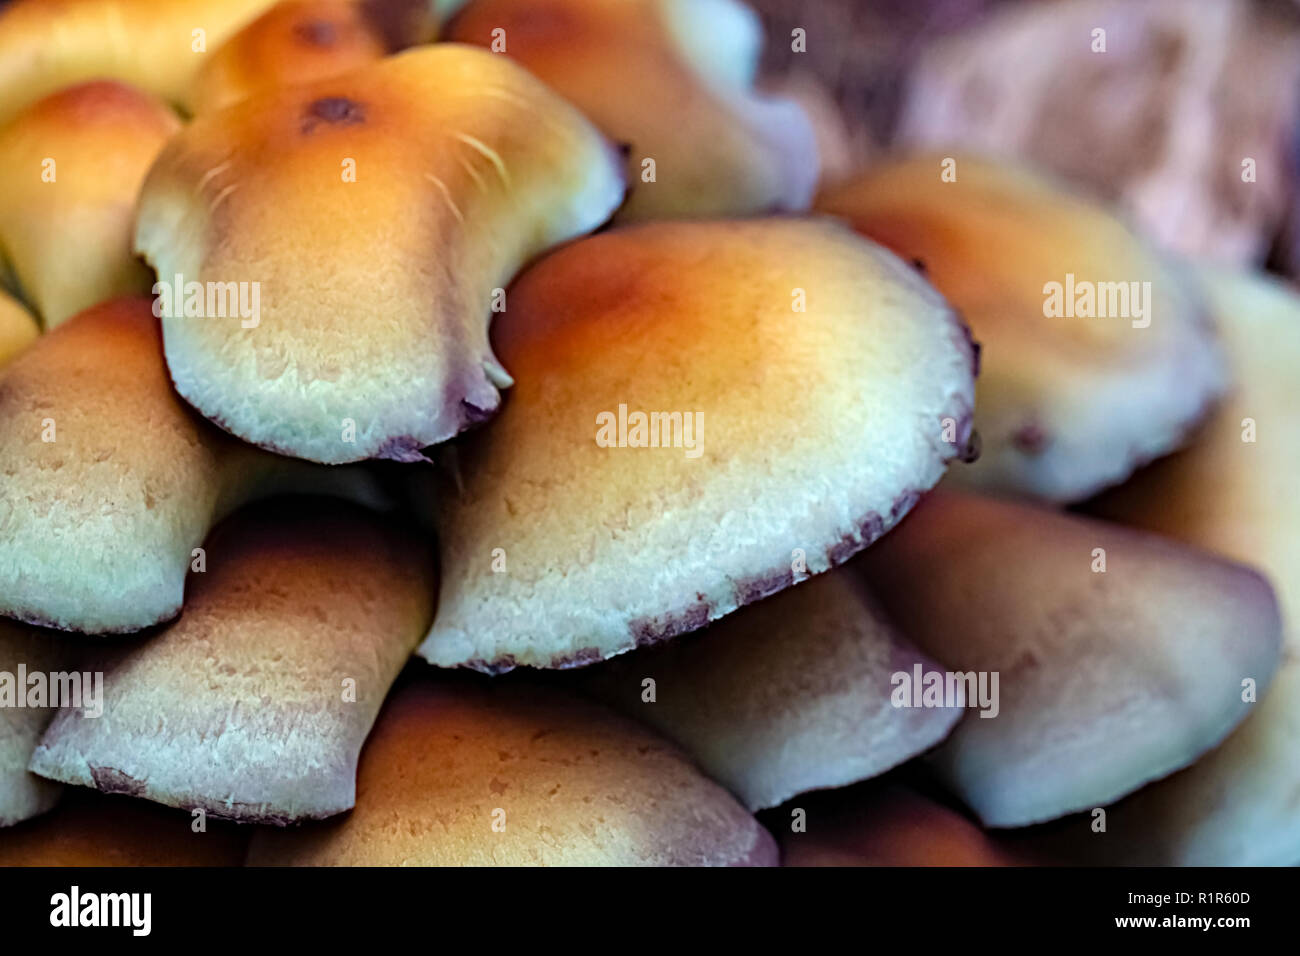 Orange inedible poisonous mushrooms in the forest. Close up view Stock Photo